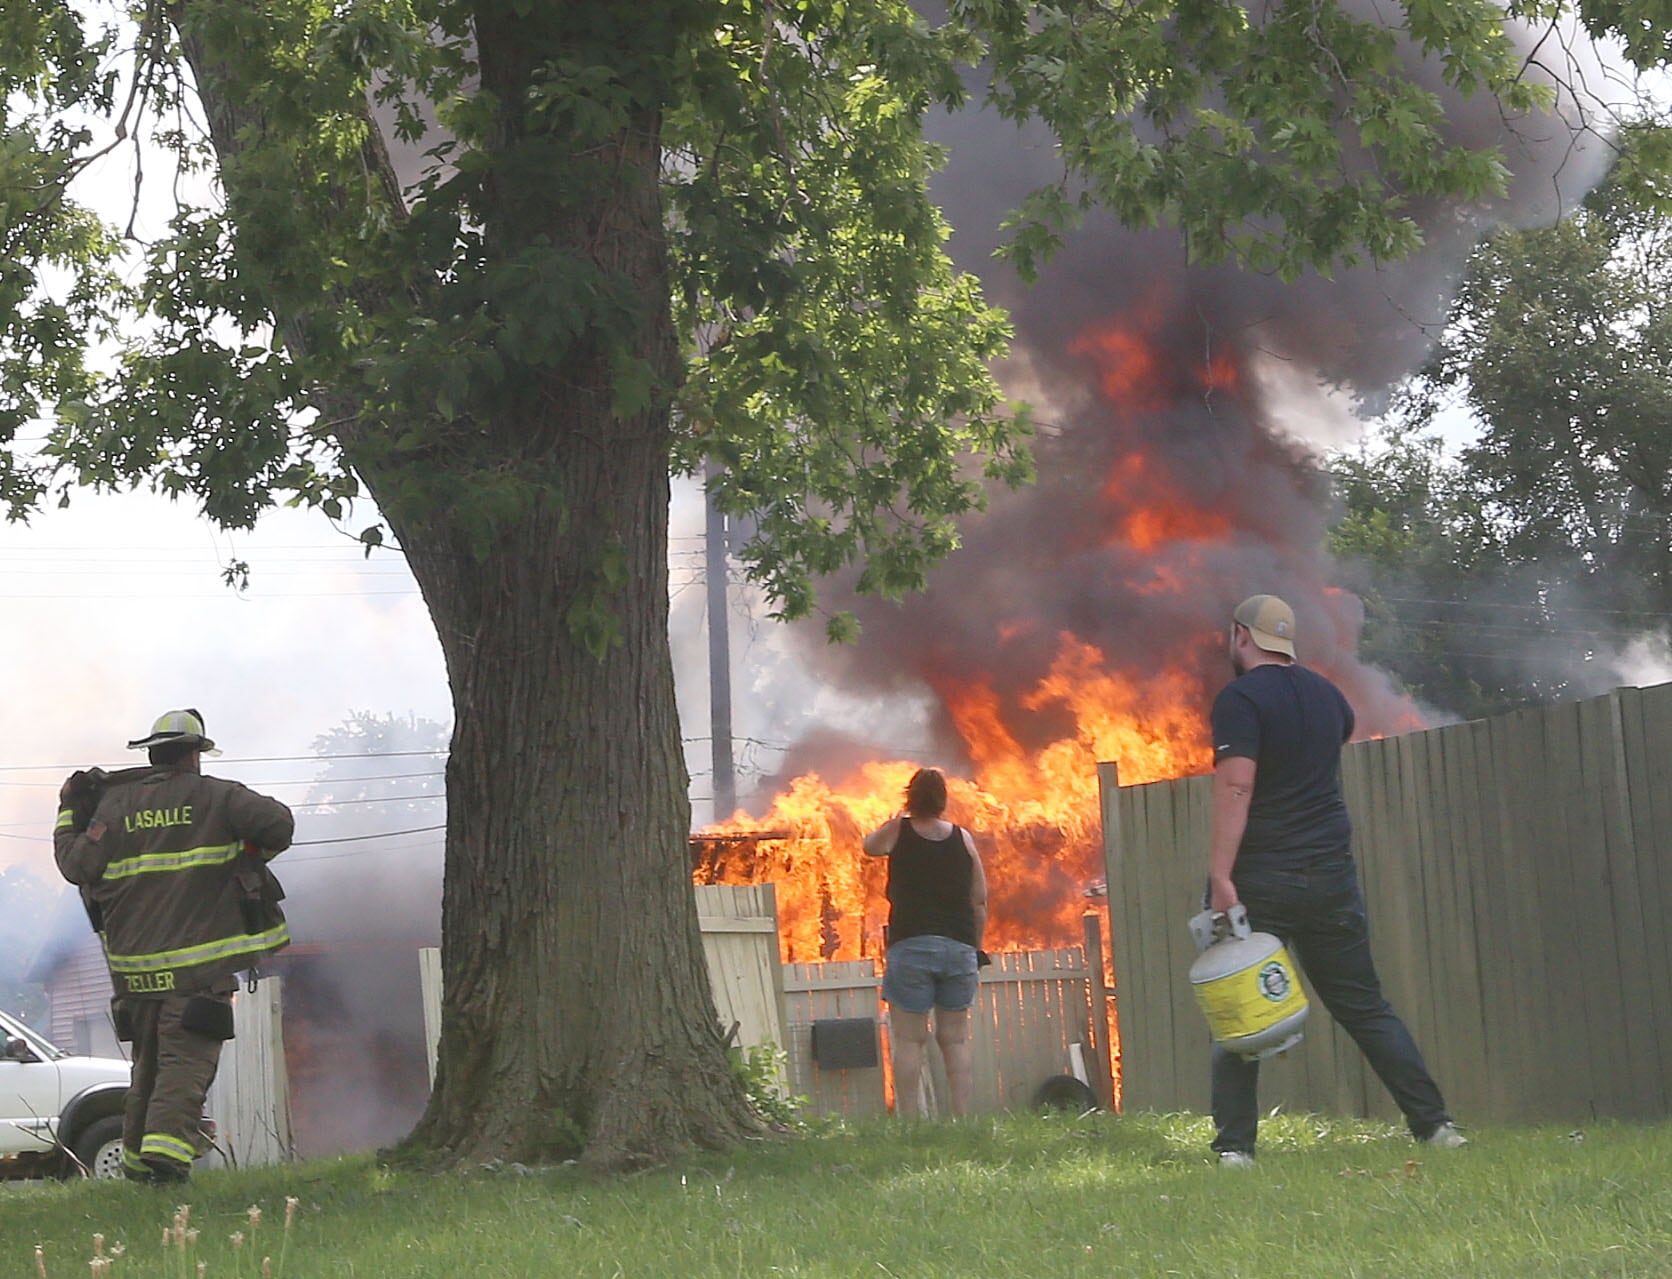 Photos: Firefighters respond to garage fire in La Salle